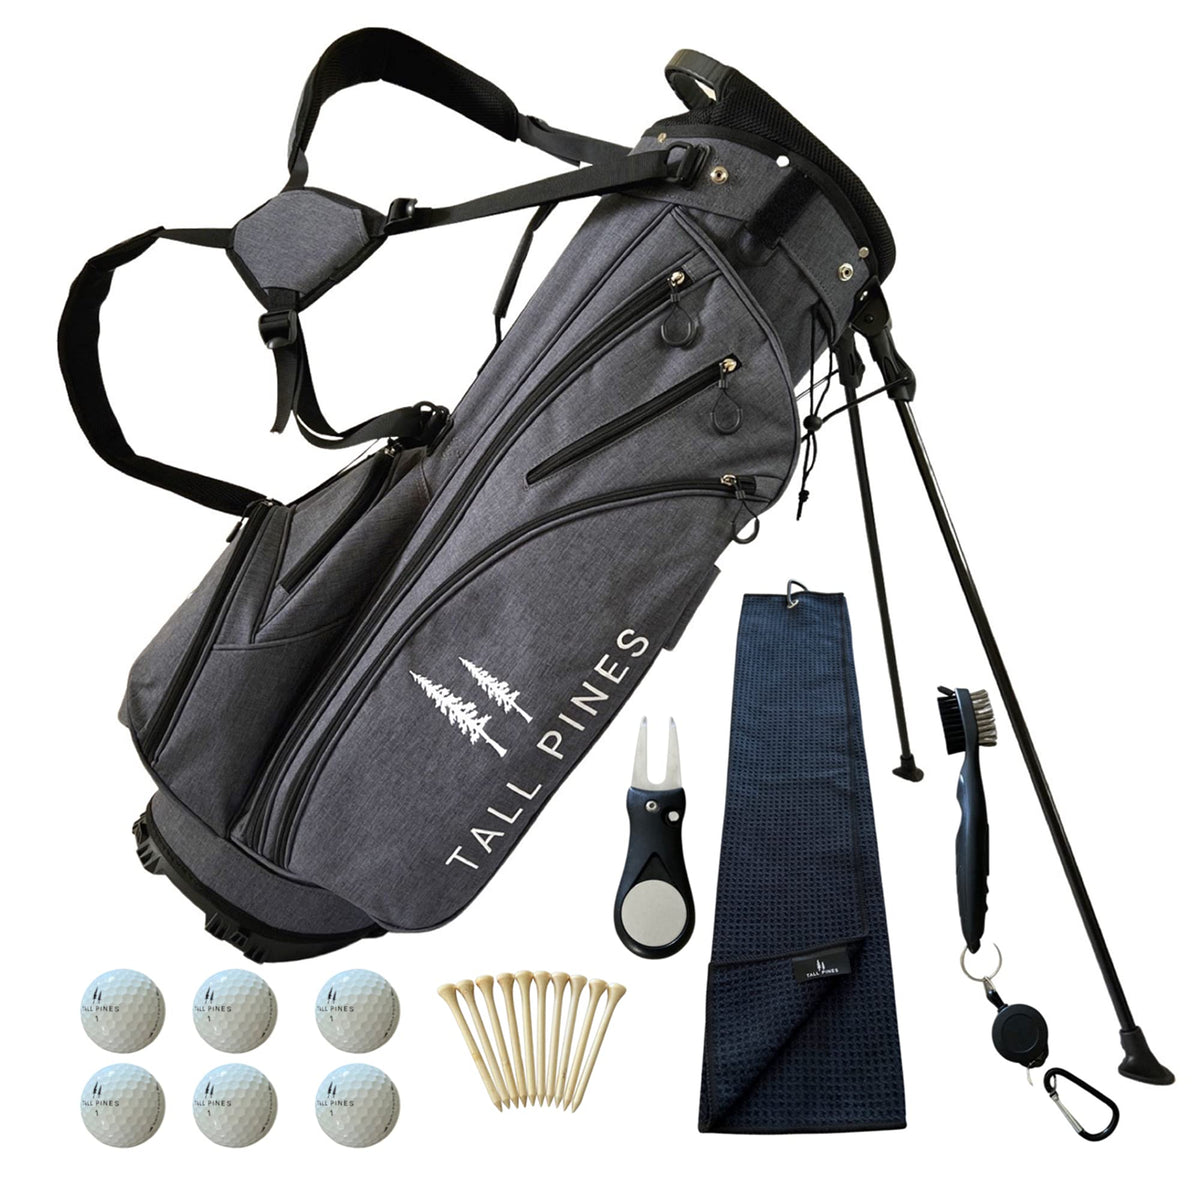 Tall Pines Golf Durable Canvas Stand Bag w/Golf Accessories Kit, 5